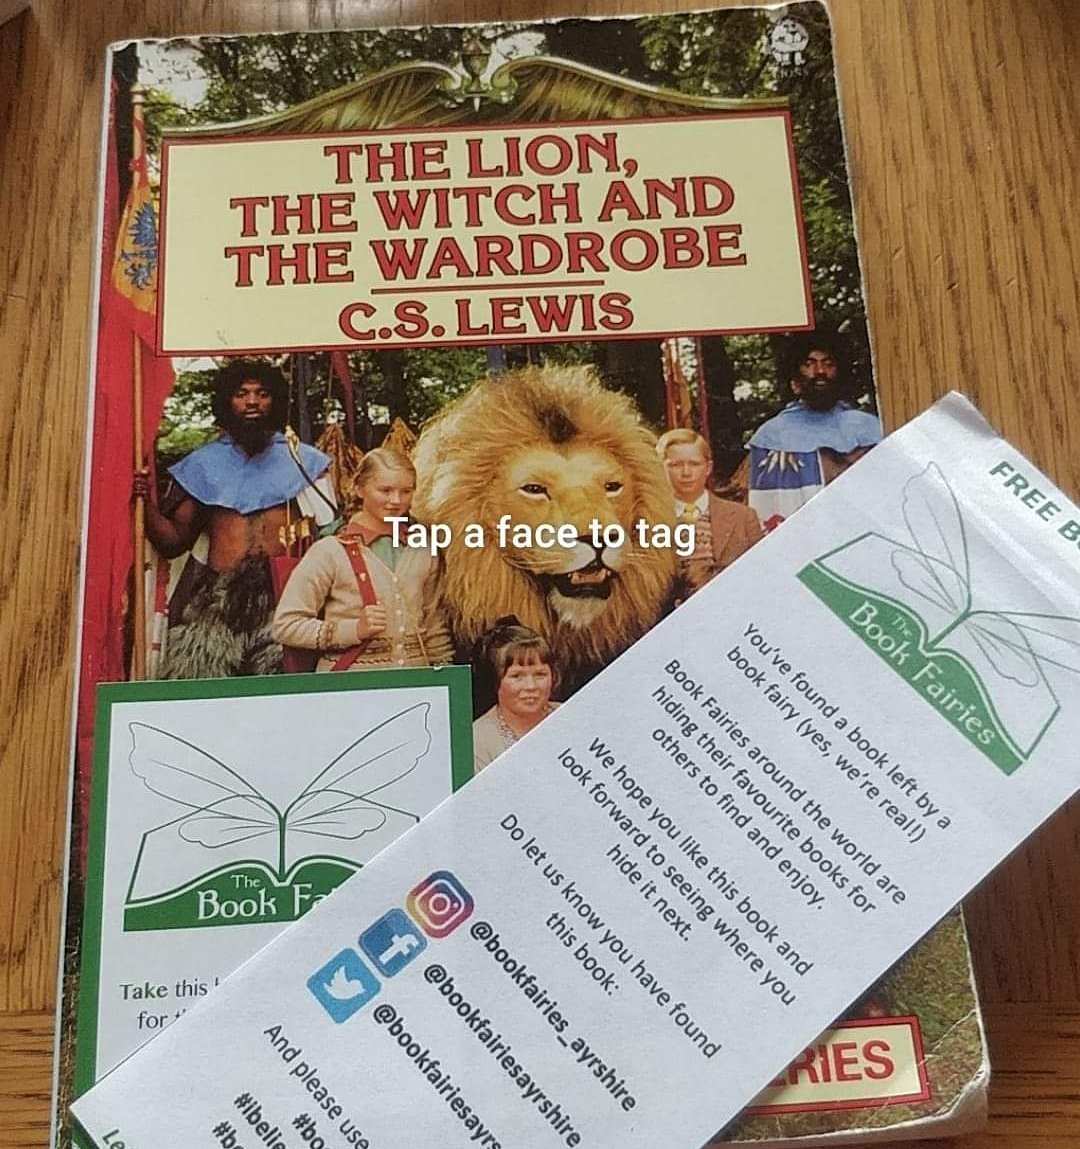 #bookfound Another book found in Ayrshire. A lovely family visiting from Birmingham found a copy of The Lion, The Witch and The Wardrobe at Dumfries House 💚

#ibelieveinbookfairies #bookfound #ayrshire #bookfairiesworldwide #bookfairiesscotland